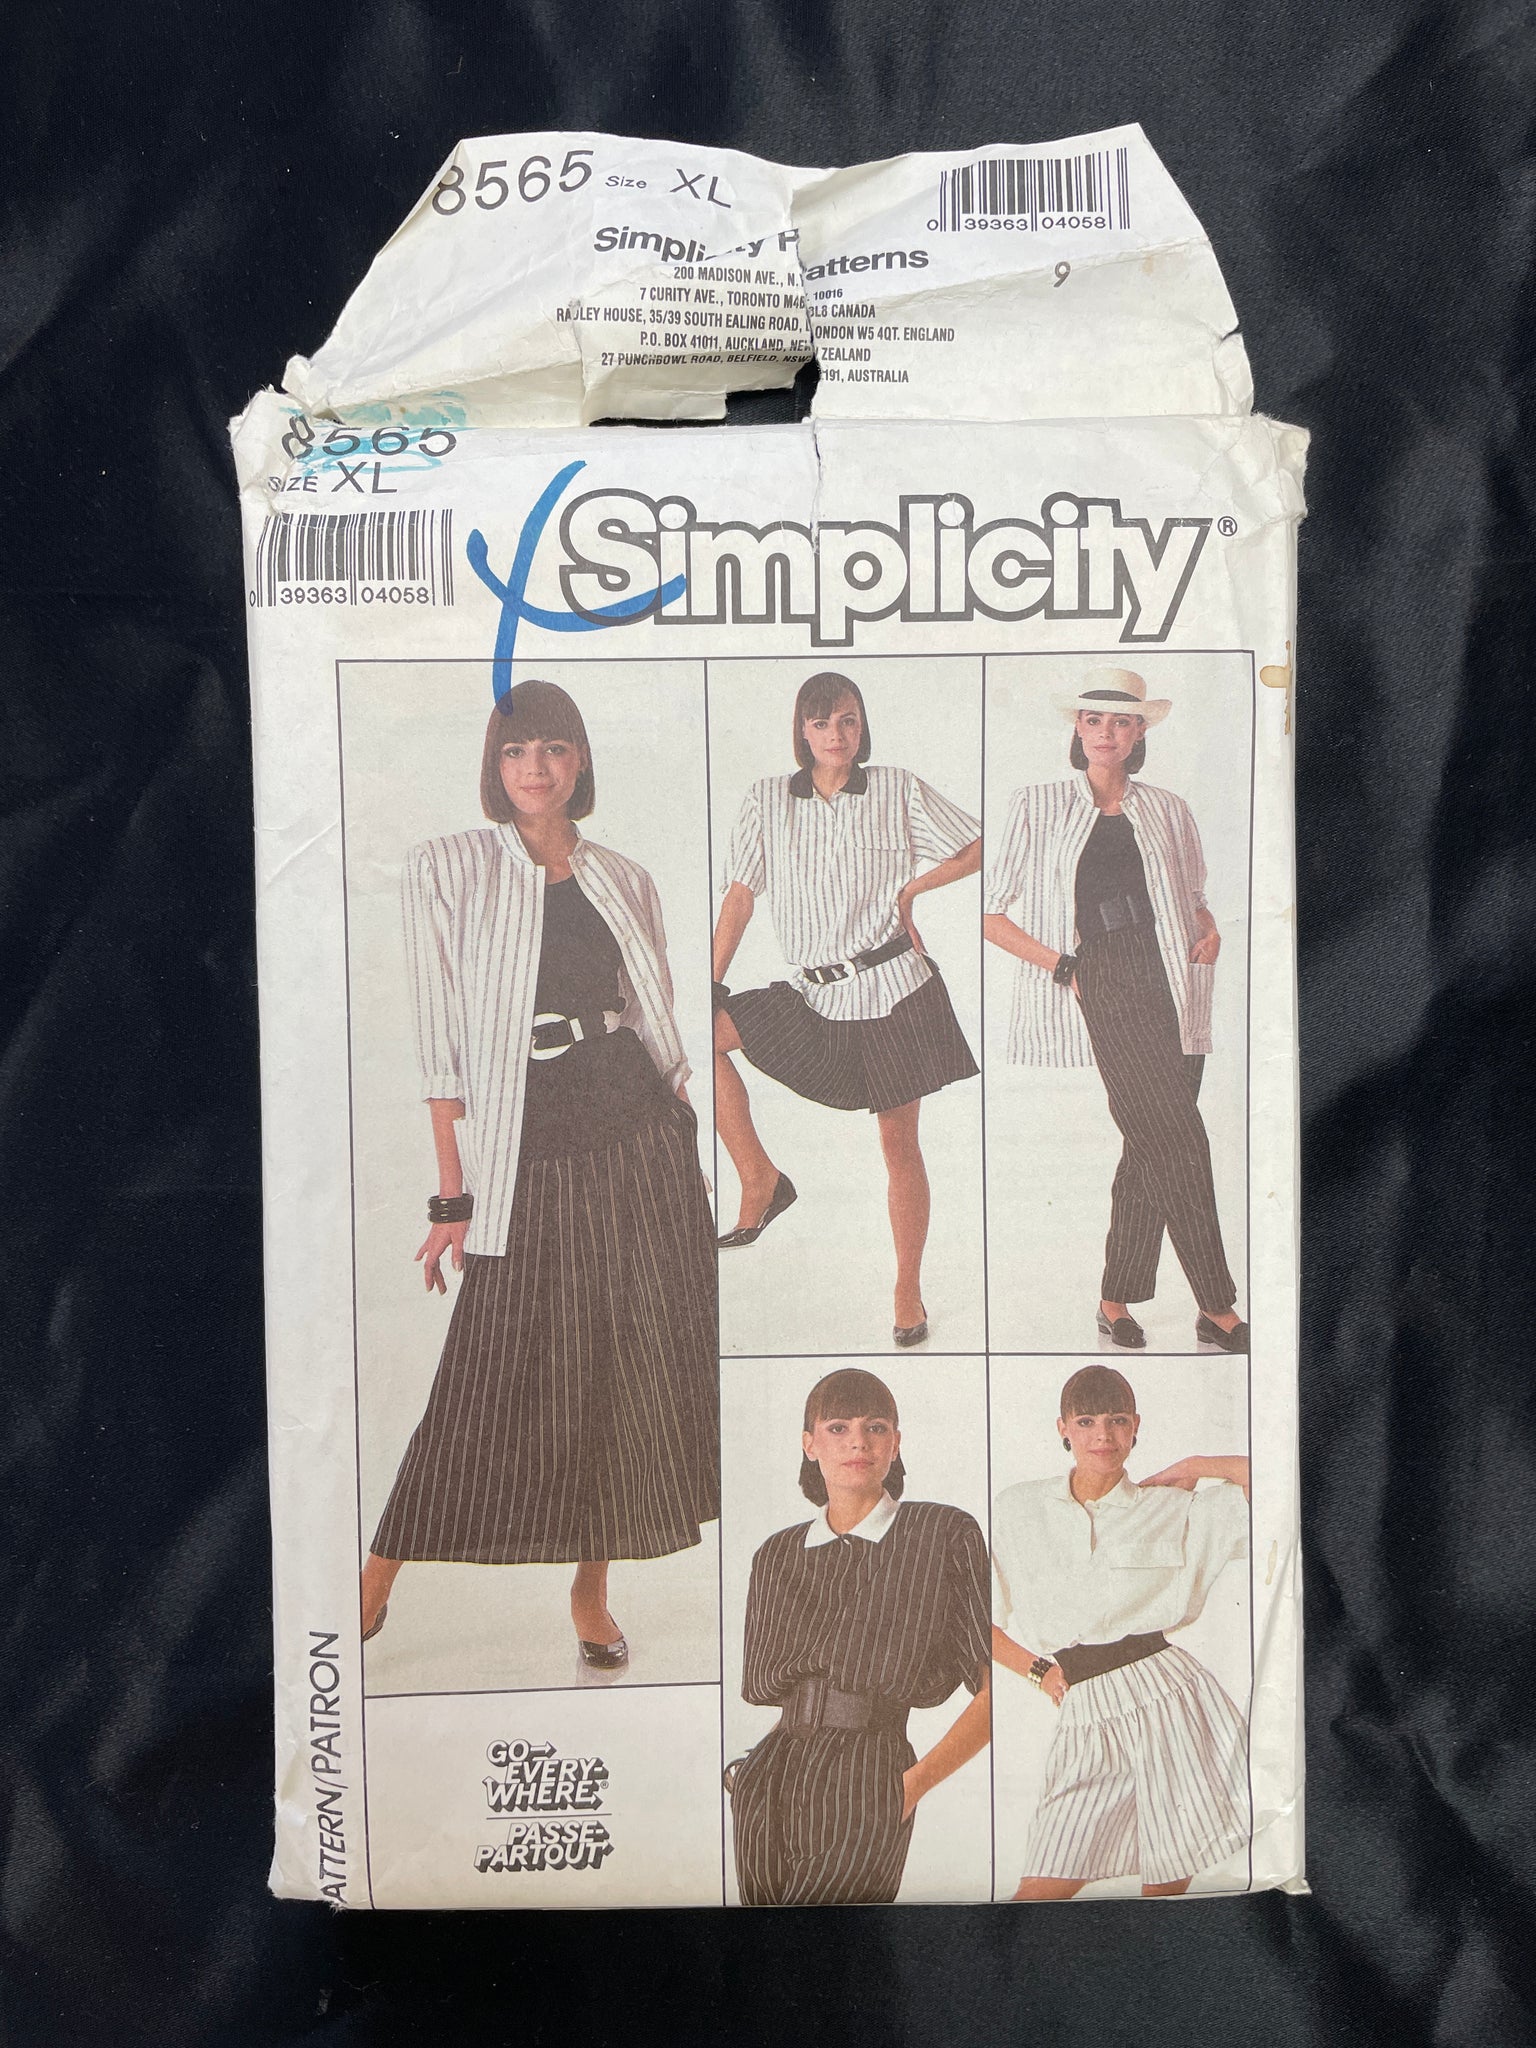 1988 Simplicity 8565 Pattern - Jacket, Blouse, Pants, Shorts and Skirt FACTORY FOLDED